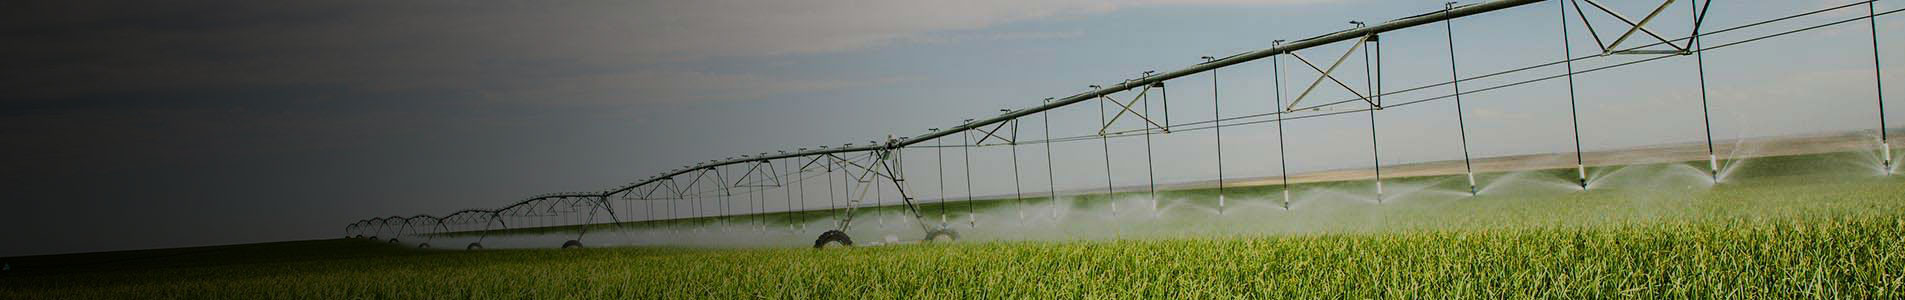 valley variable rate irrigation speed control - water application management solution